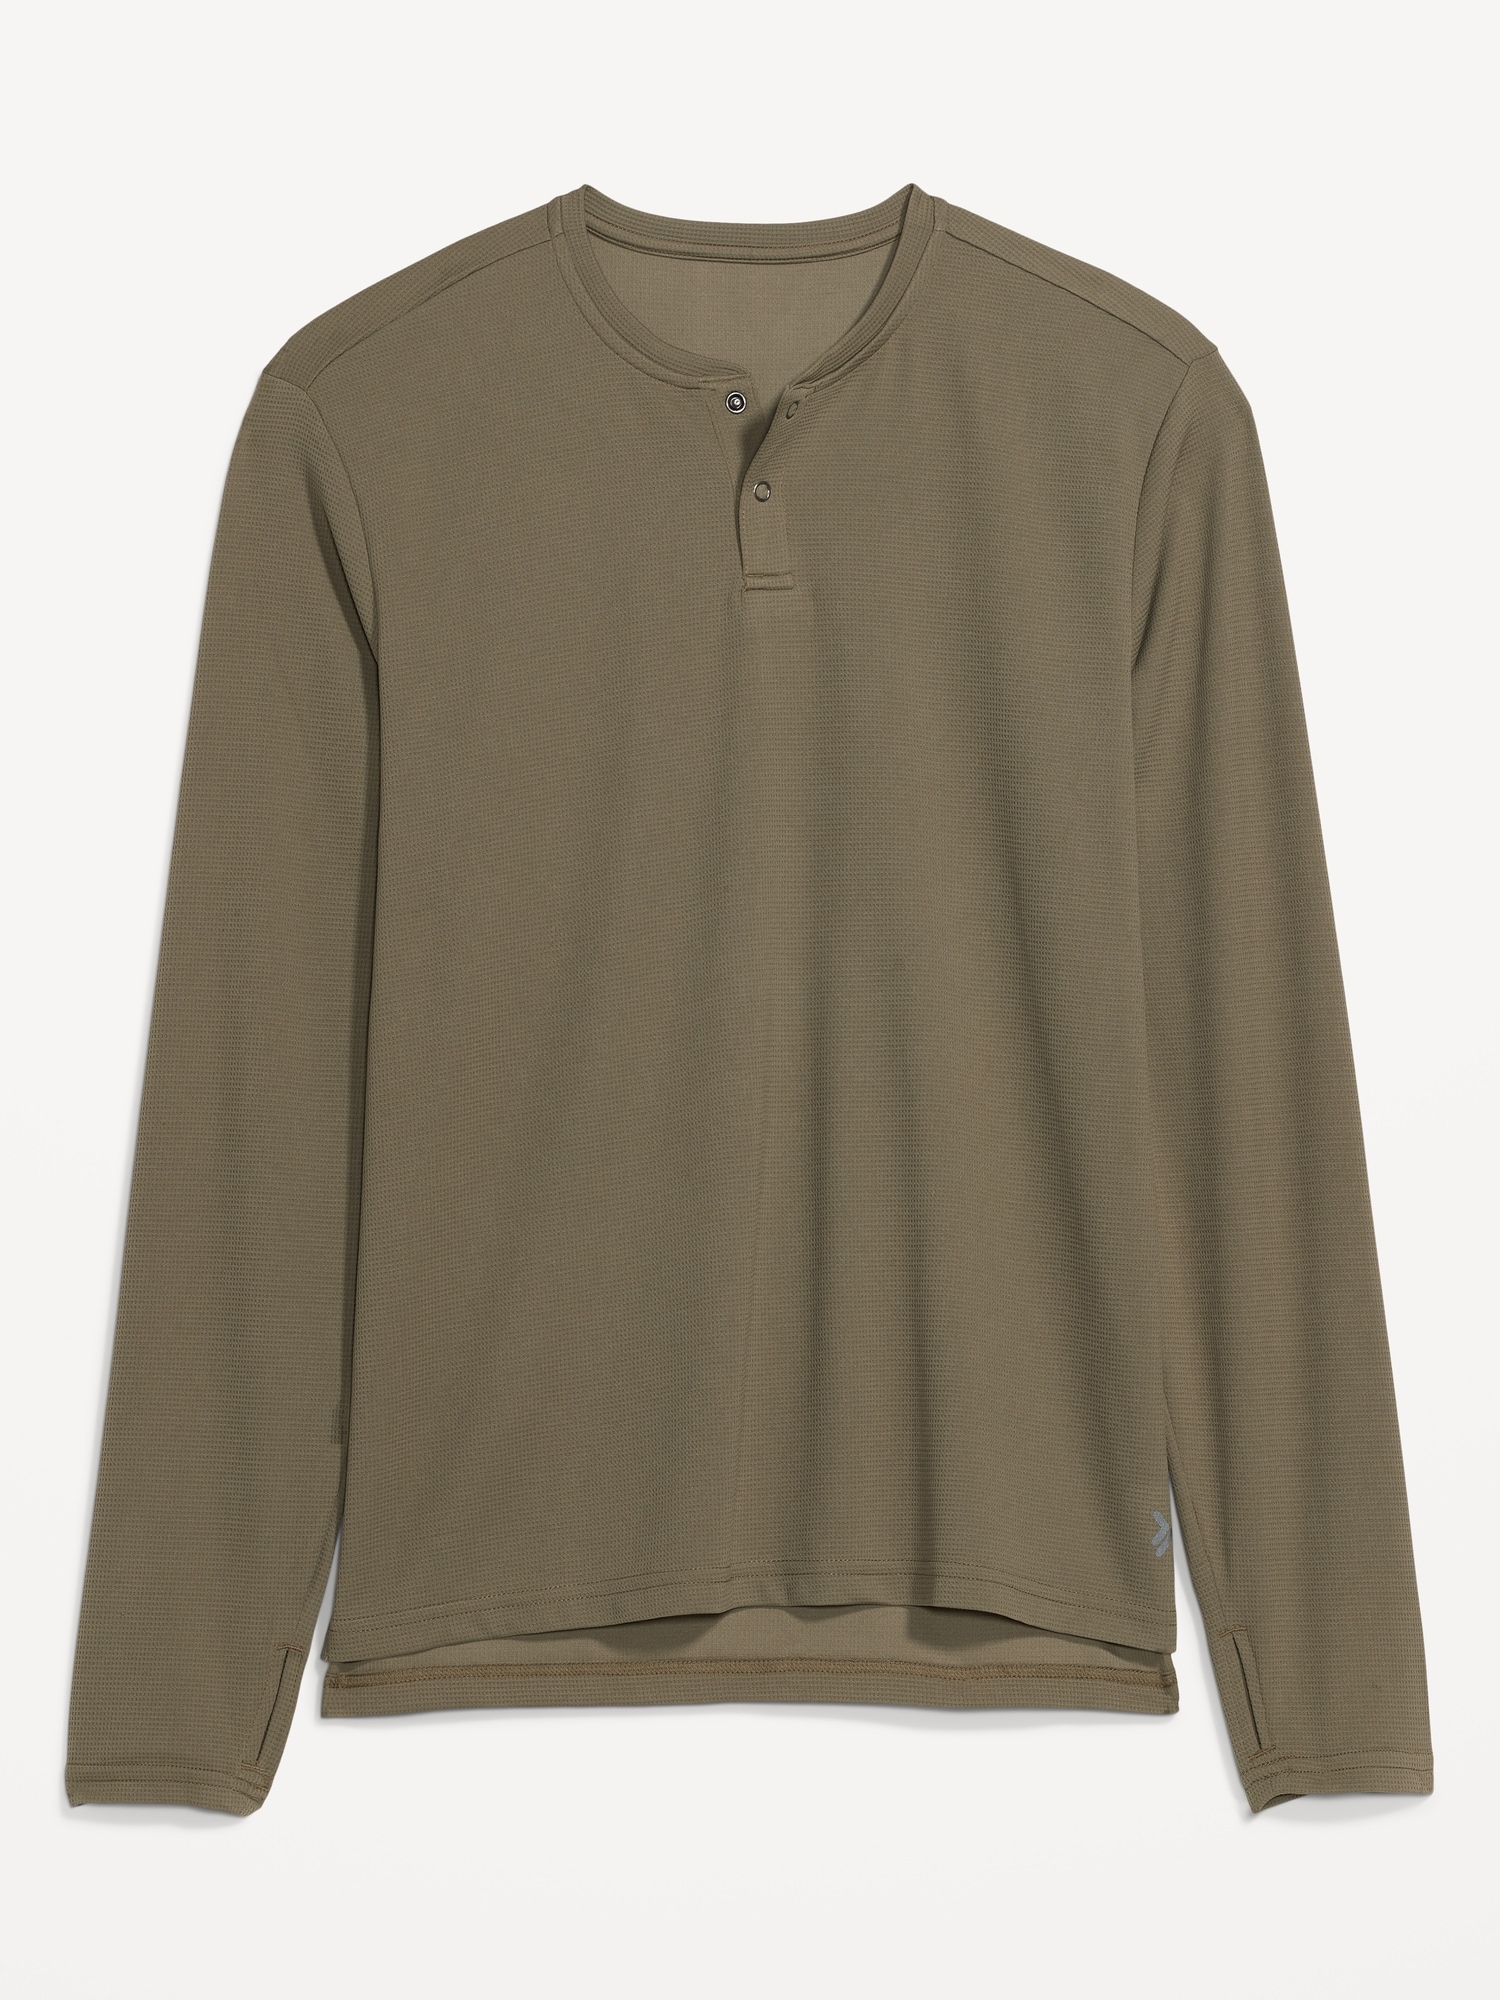 Buy Long Sleeve Thermal Henley (B&T) Men's Shirts from Chaps. Find